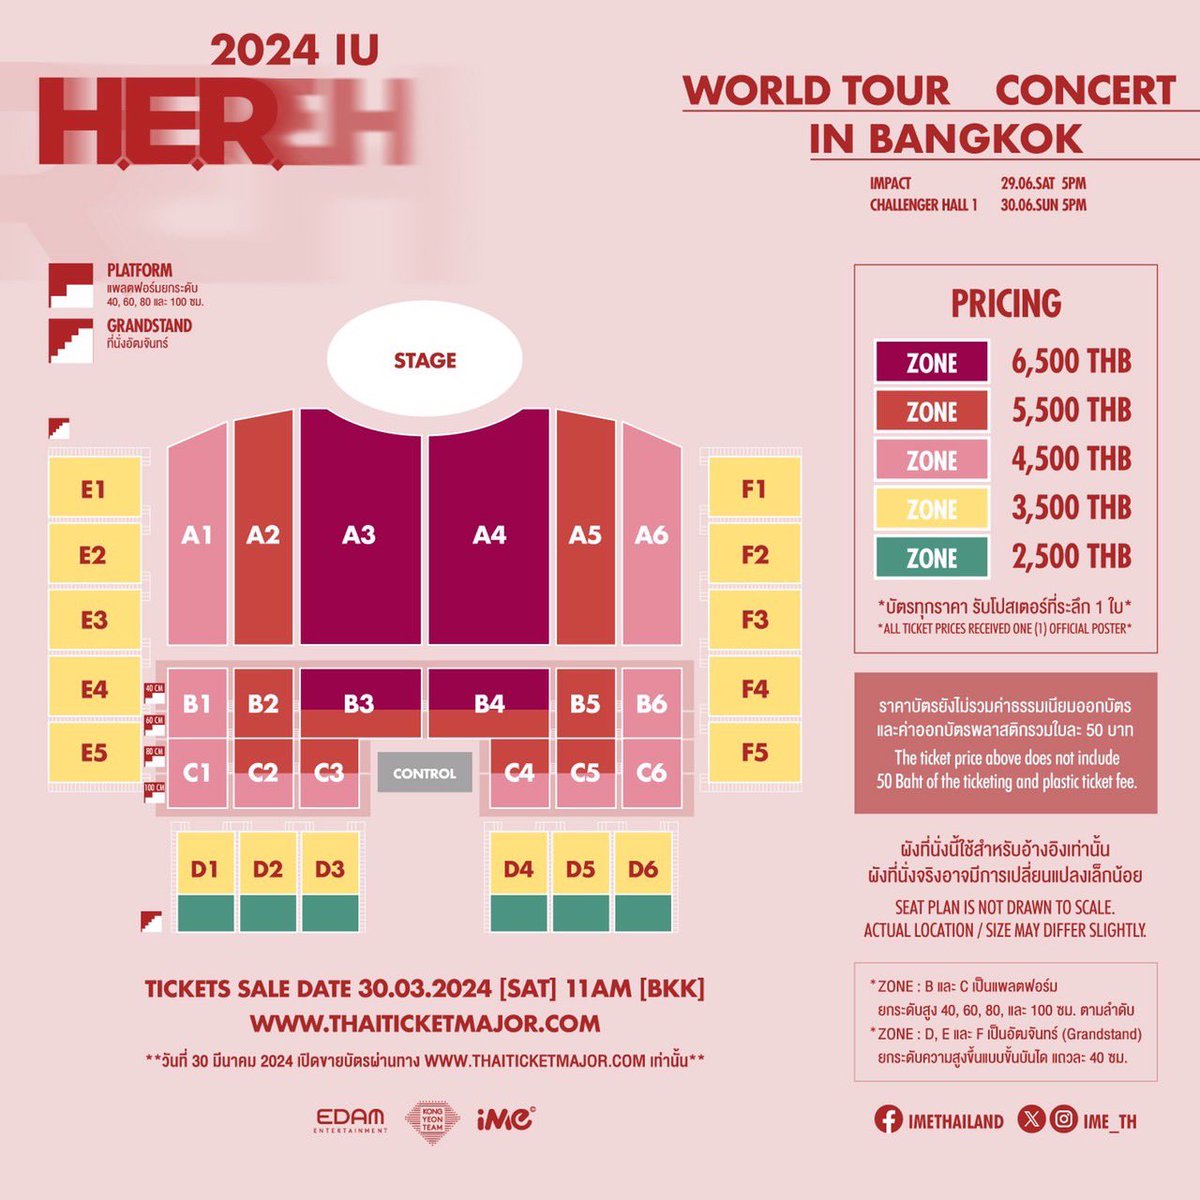 I have #HER_WORLD_TOUR_IN_BKK
×4 section A3,A4 WTS,
×4 section B3,B4 WTS.
Dm if interested or Dm on line line.me/ti/p/wYWN_FqG4K
아이유 #IU #HER 
#HER_World_Tour 
#HER_WORLD_TOUR_IN_BKK